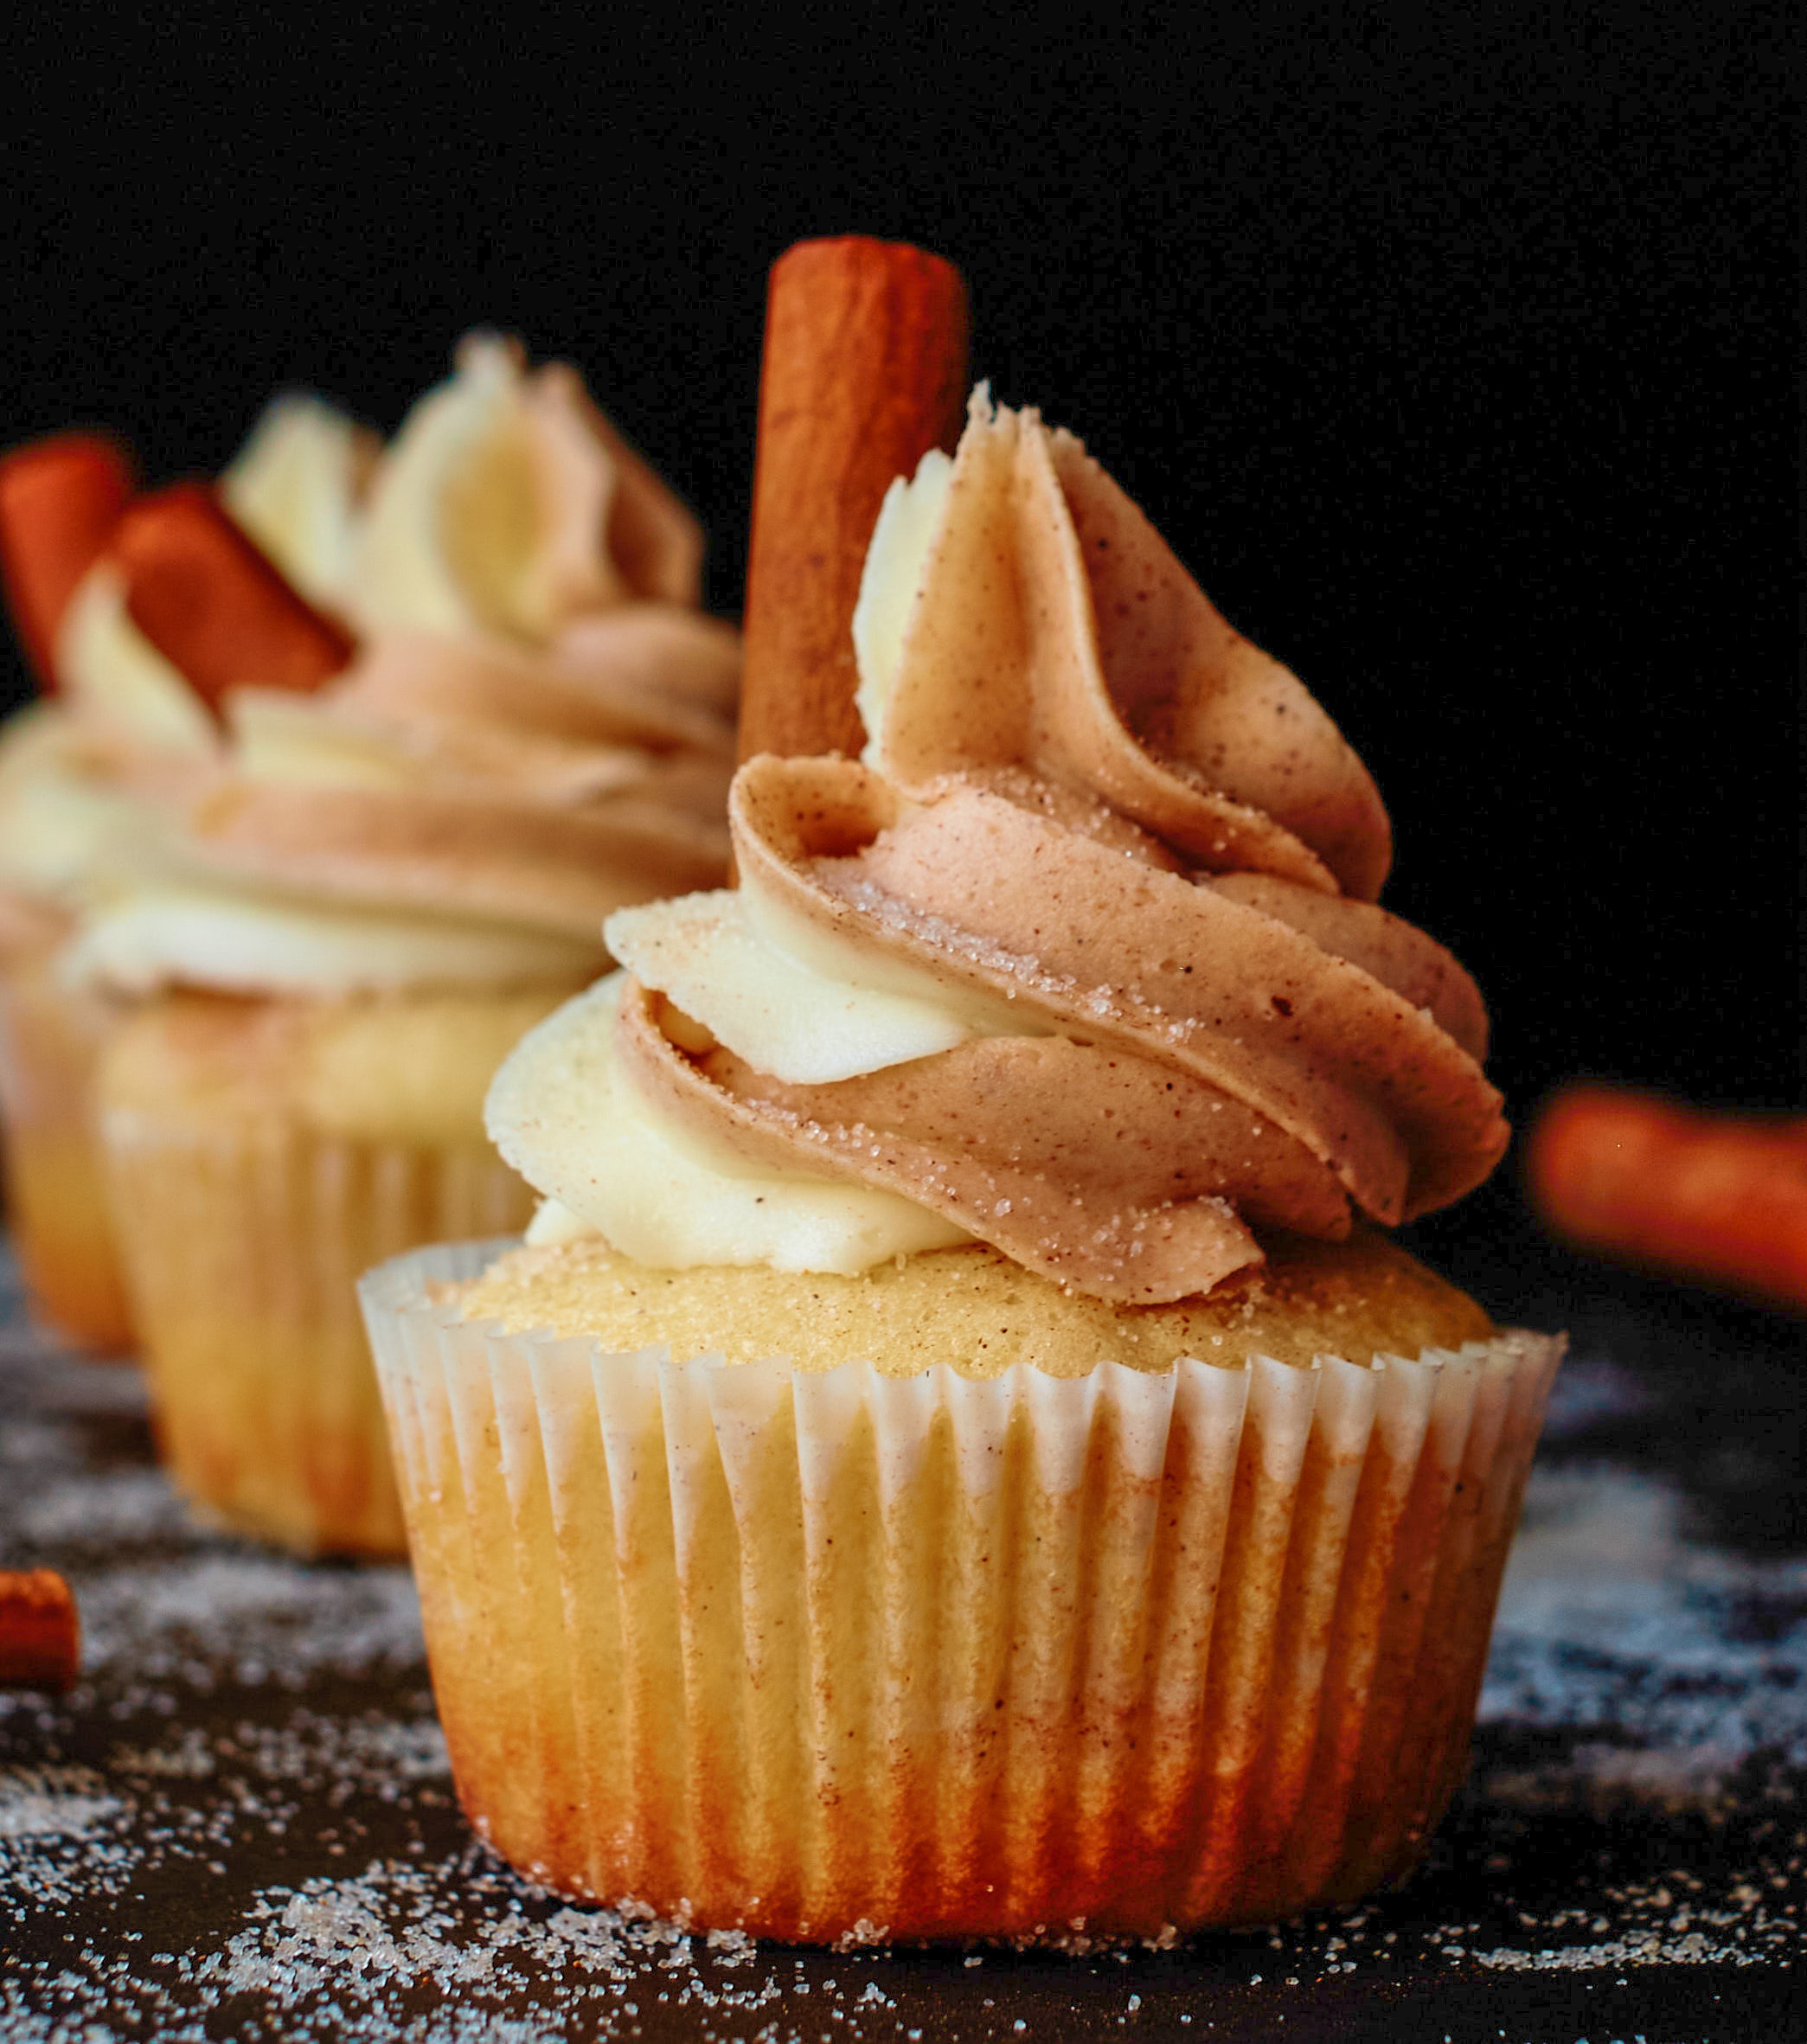 frosted cupcake with cinnamon stick